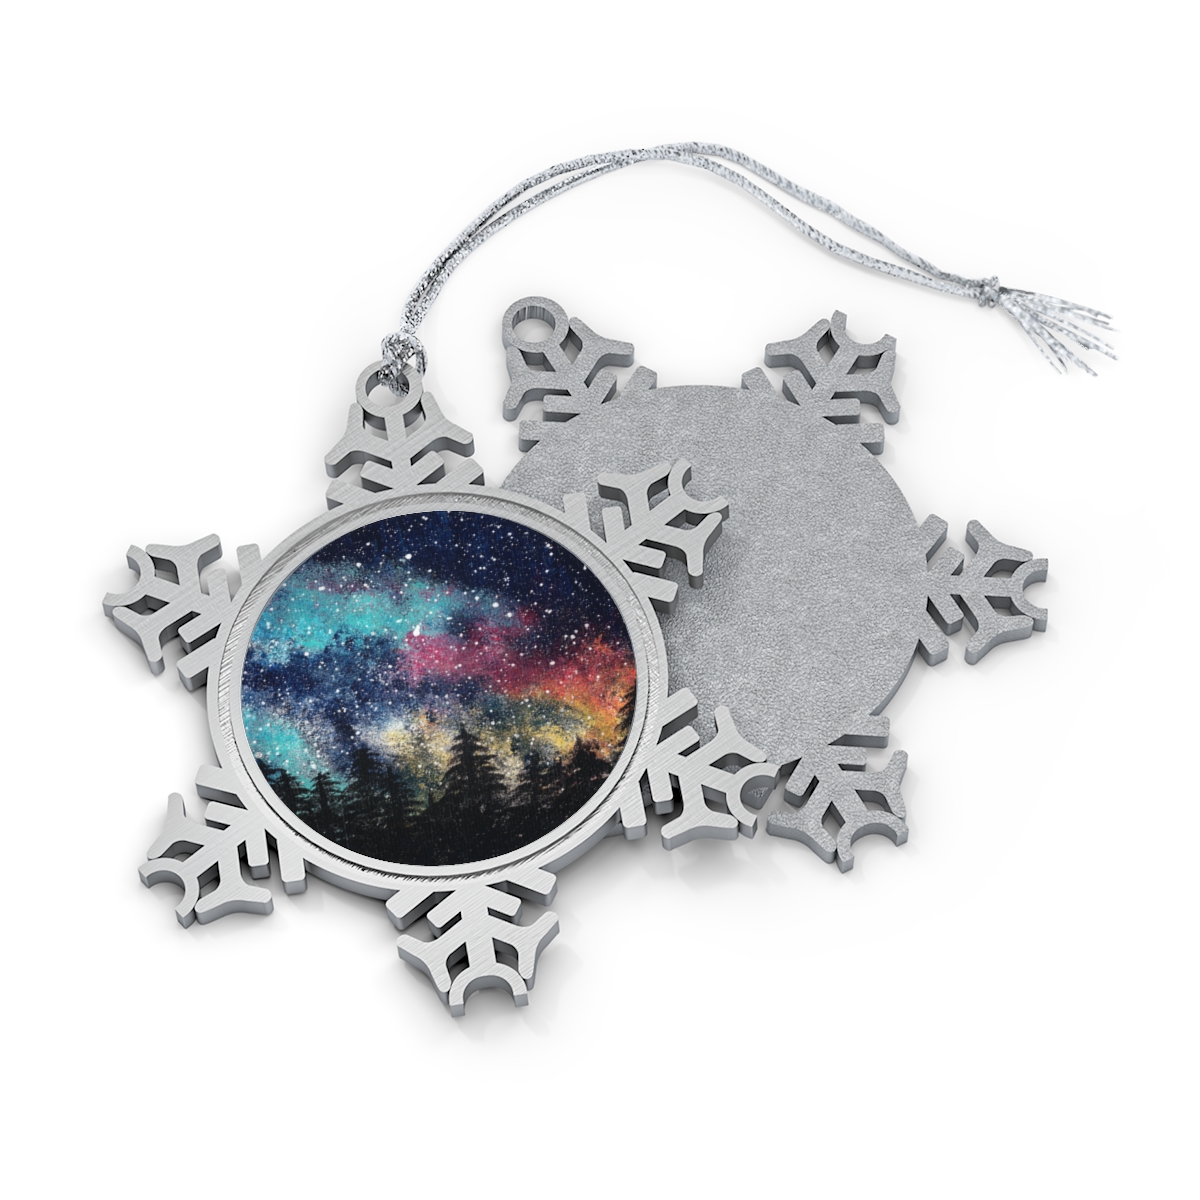 Pewter Snowflake Ornament - Big Sky Country